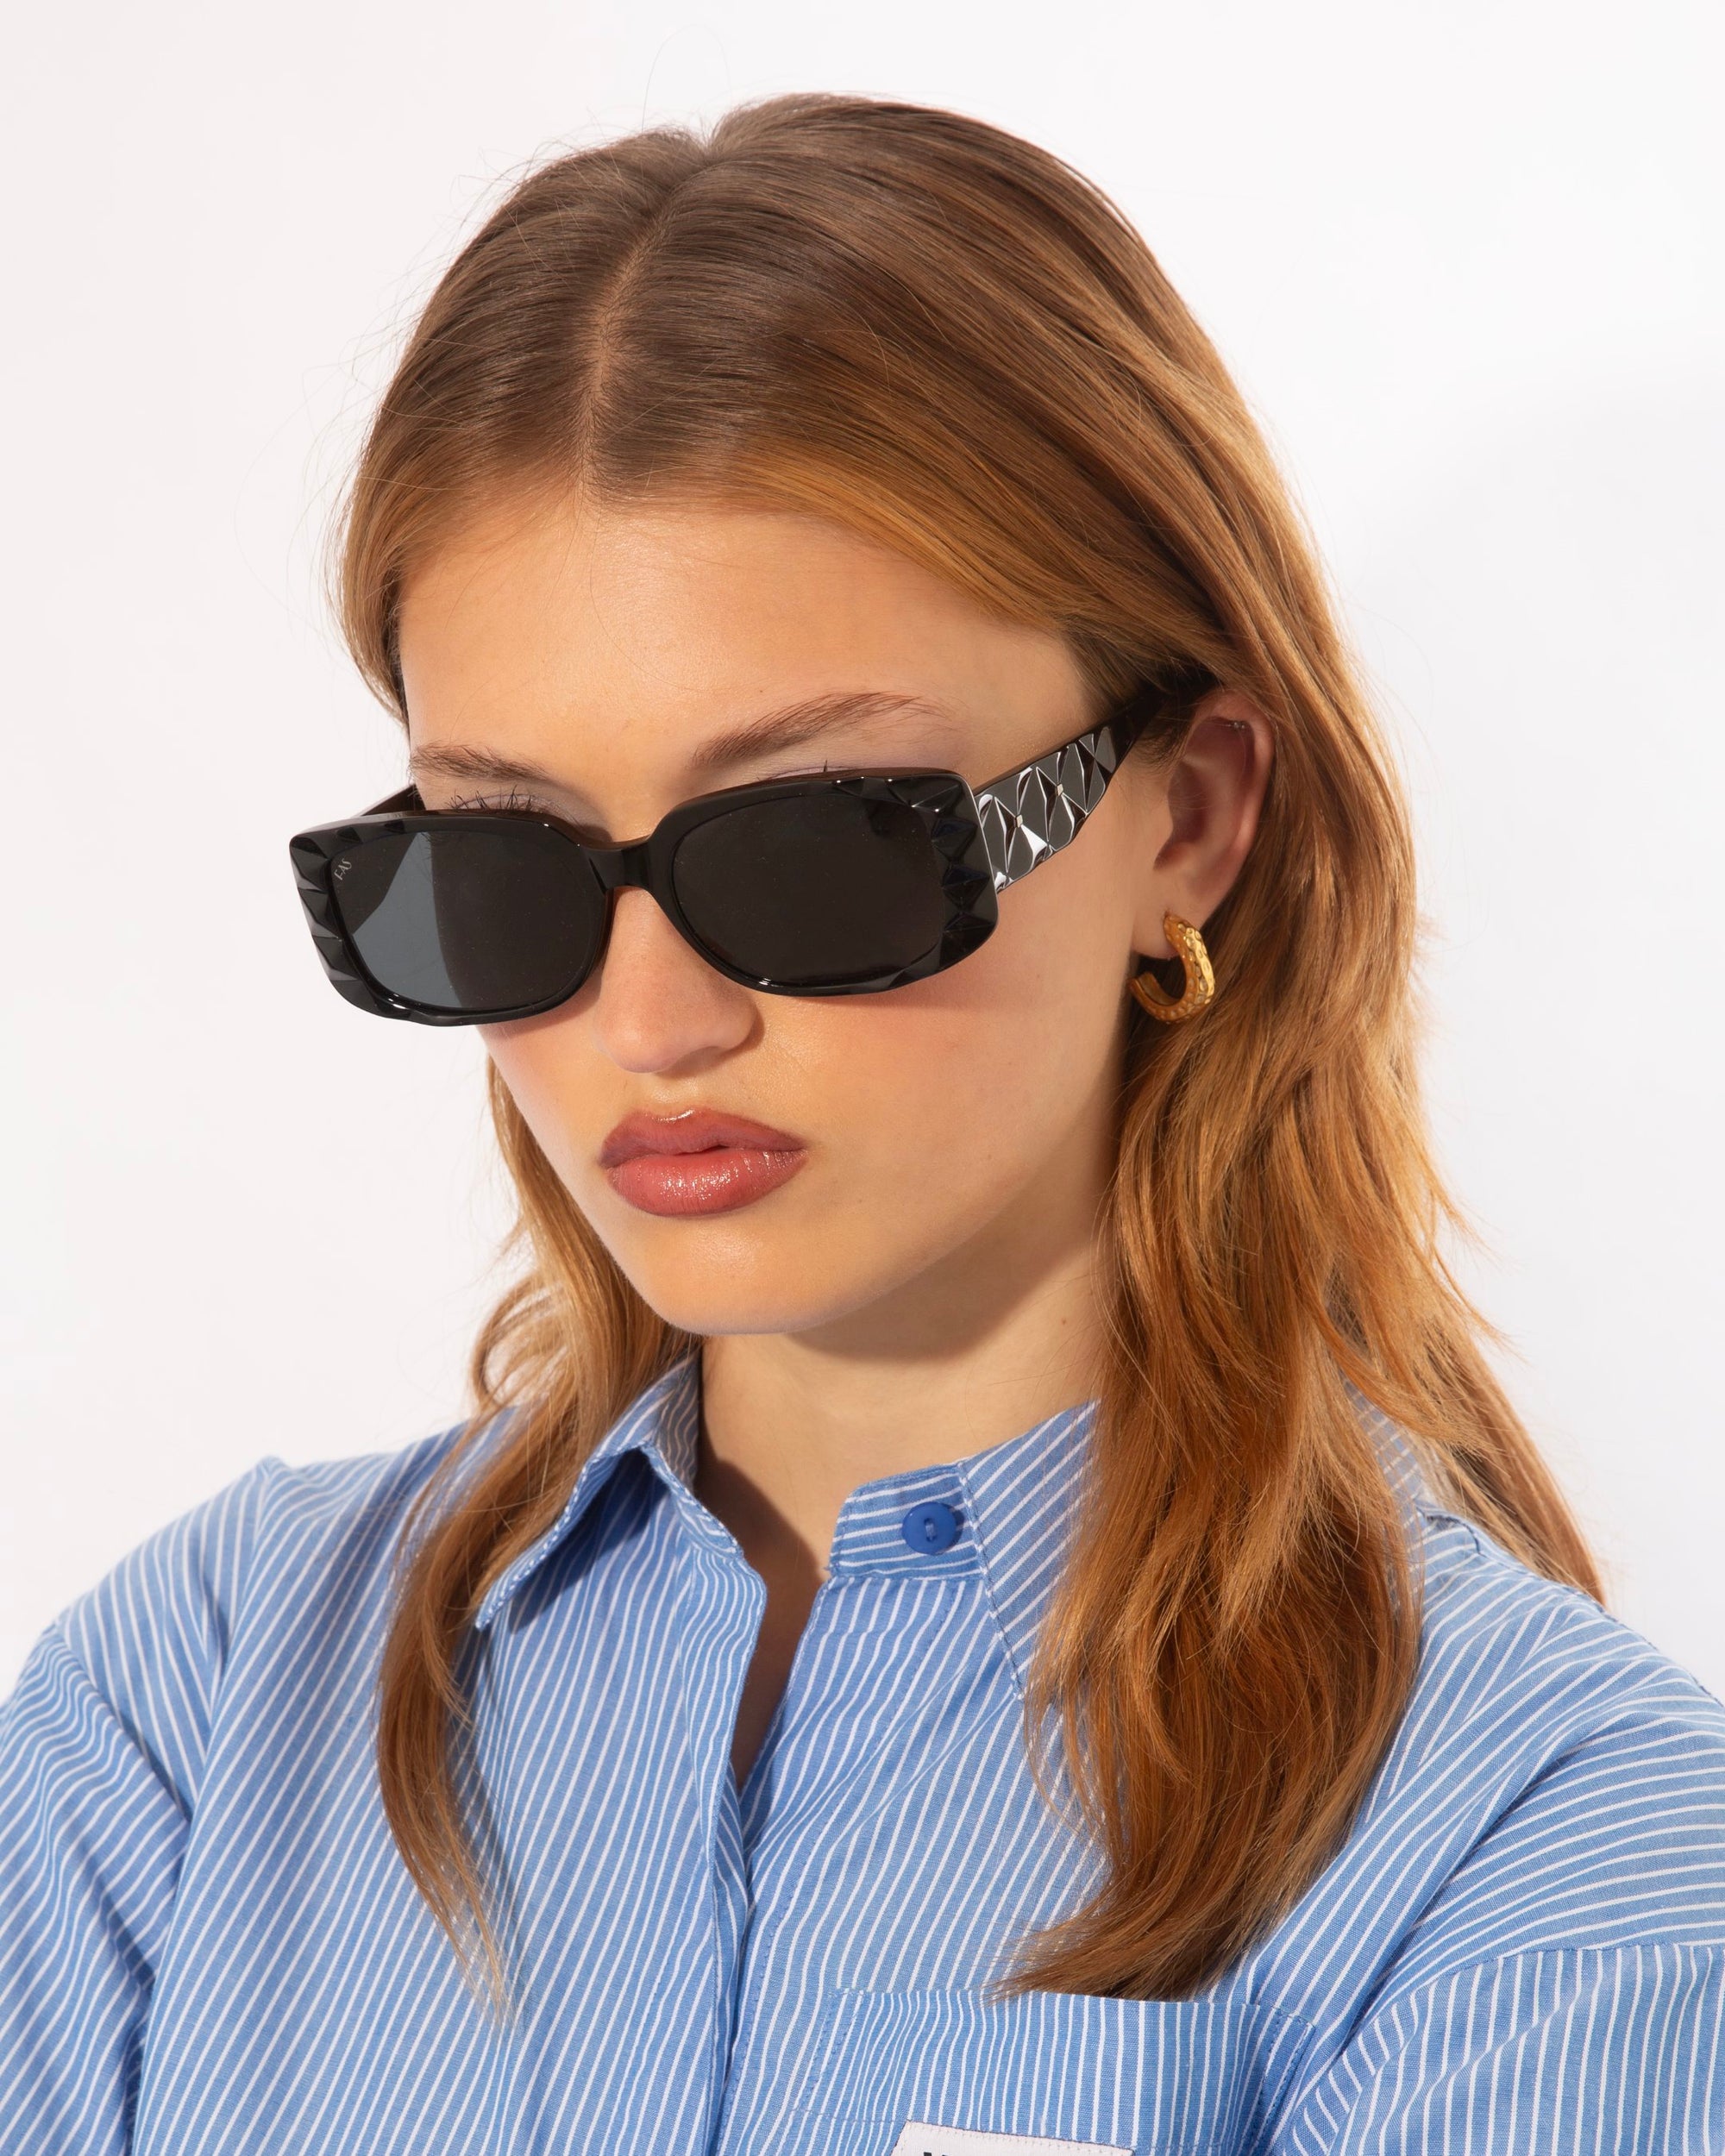 A person with wavy, auburn hair is wearing black rectangular For Art's Sake® Cushion sunglasses with a textured frame and ultra-lightweight nylon lenses offering 100% UV protection. They also have gold hoop earrings and a blue, striped button-up shirt. The person is looking down with a serious expression against a plain white background.